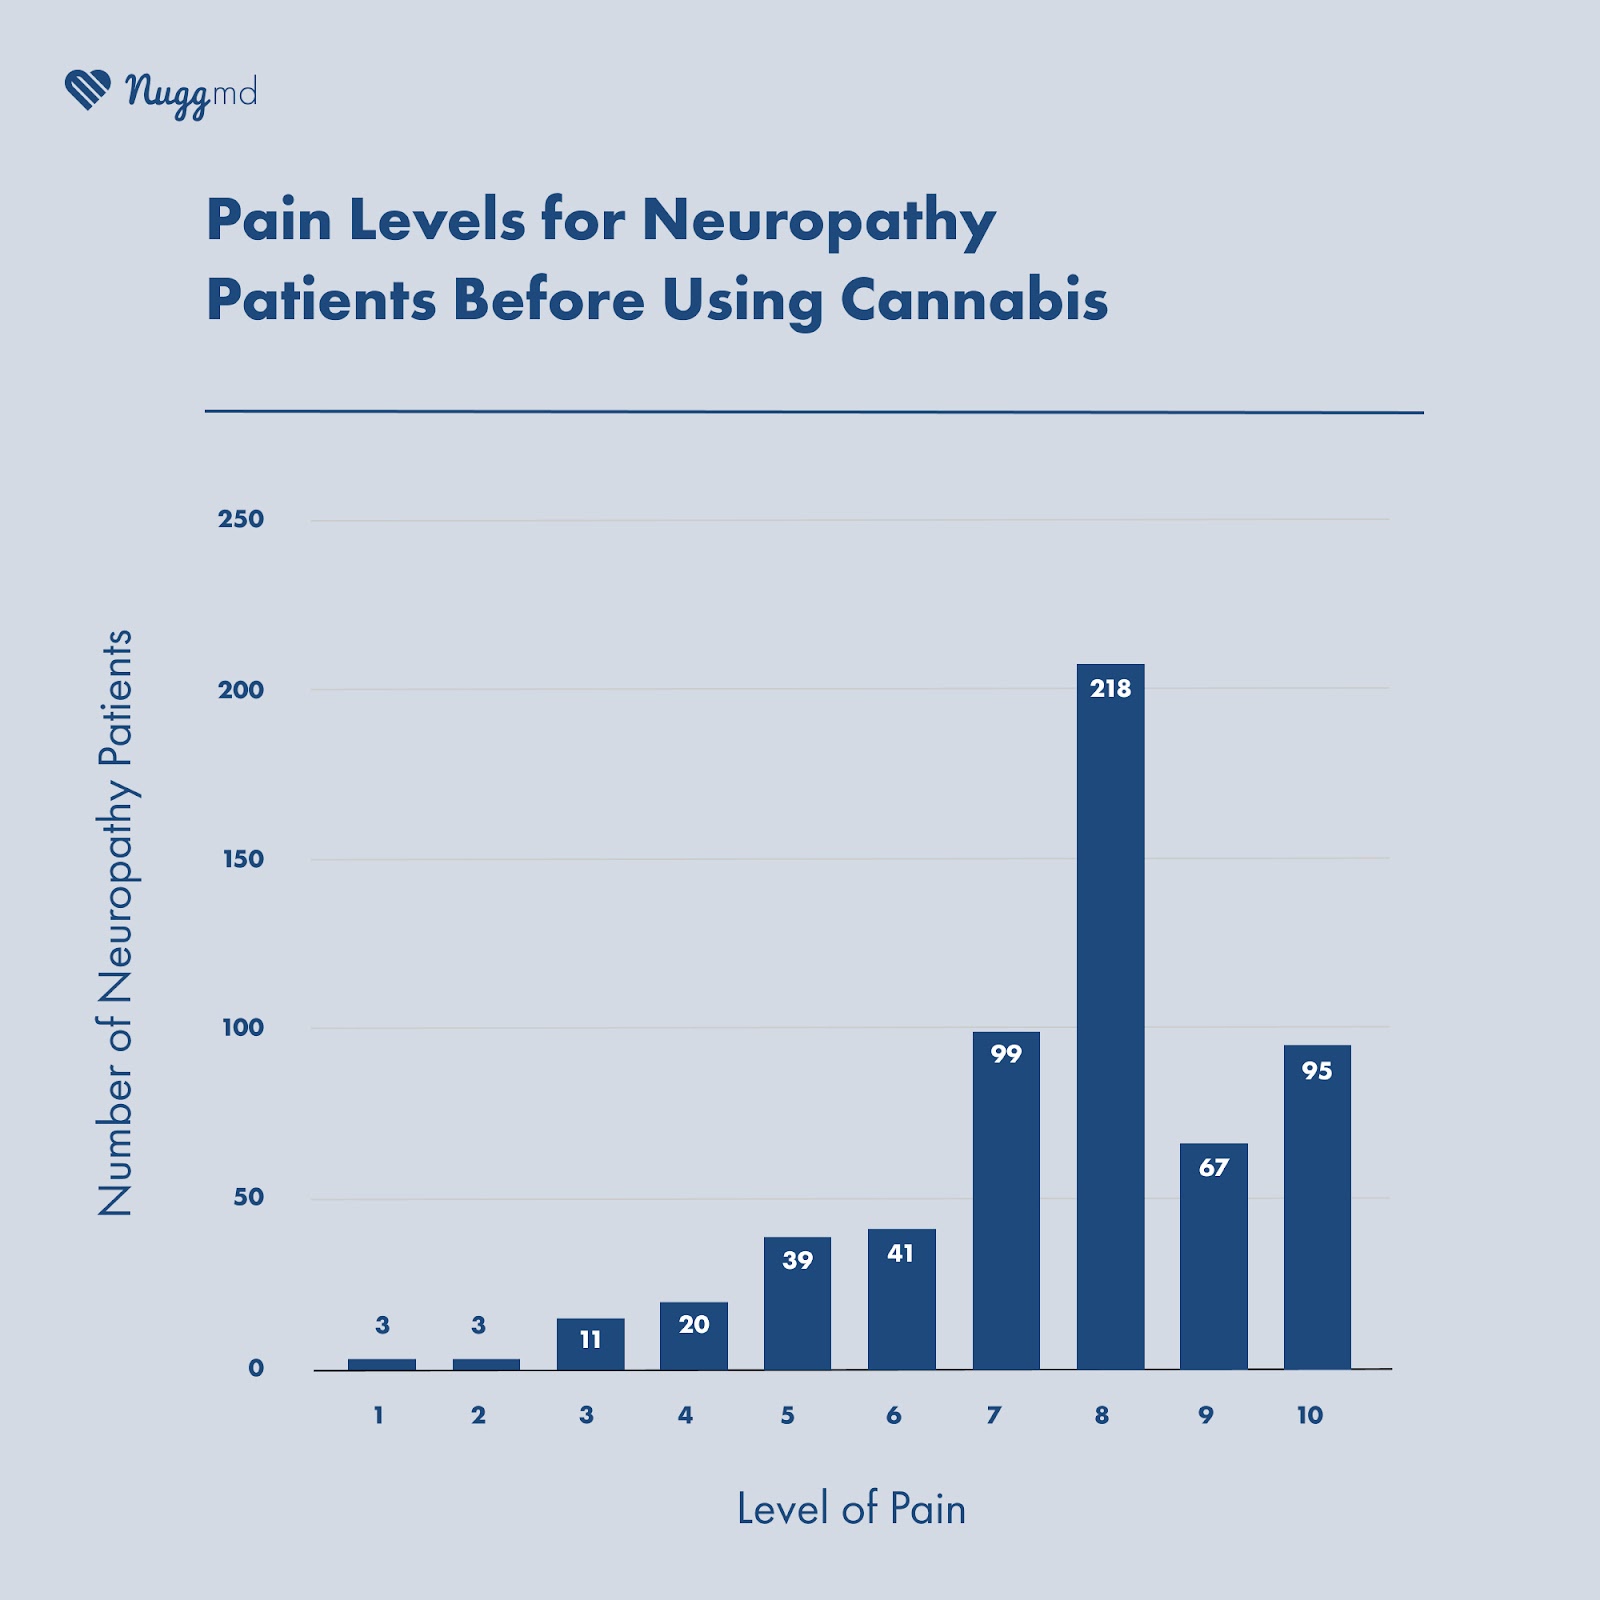 pain levels for neuropathy patients before using cannabis